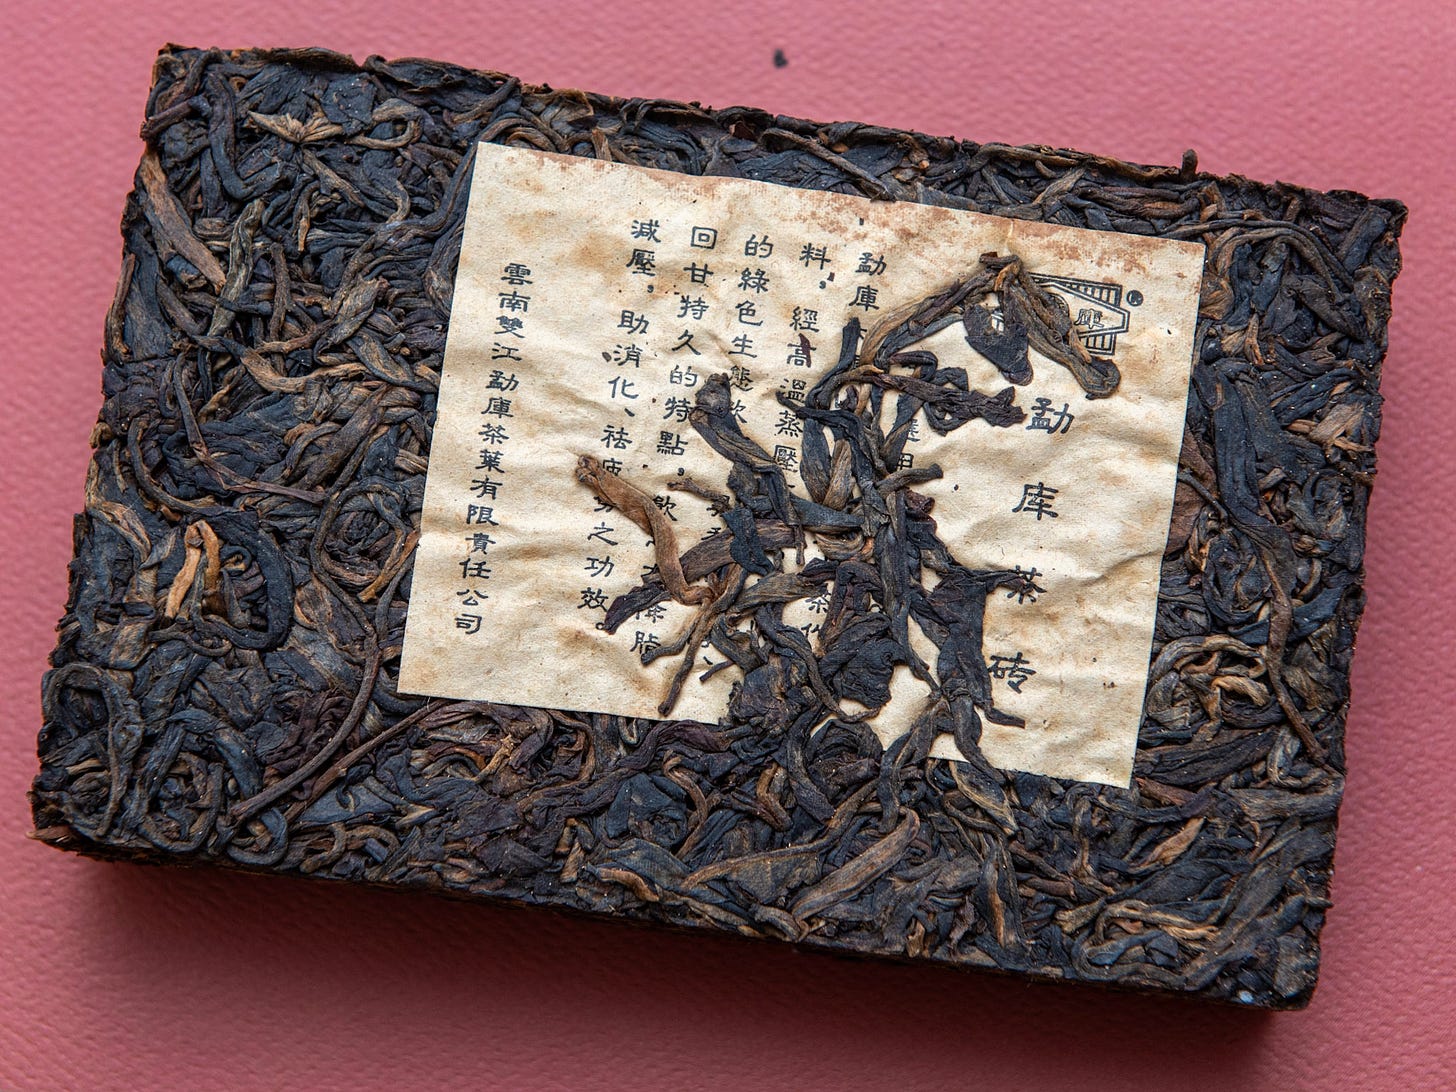 ID: A brick of aged puer tea from Mengku